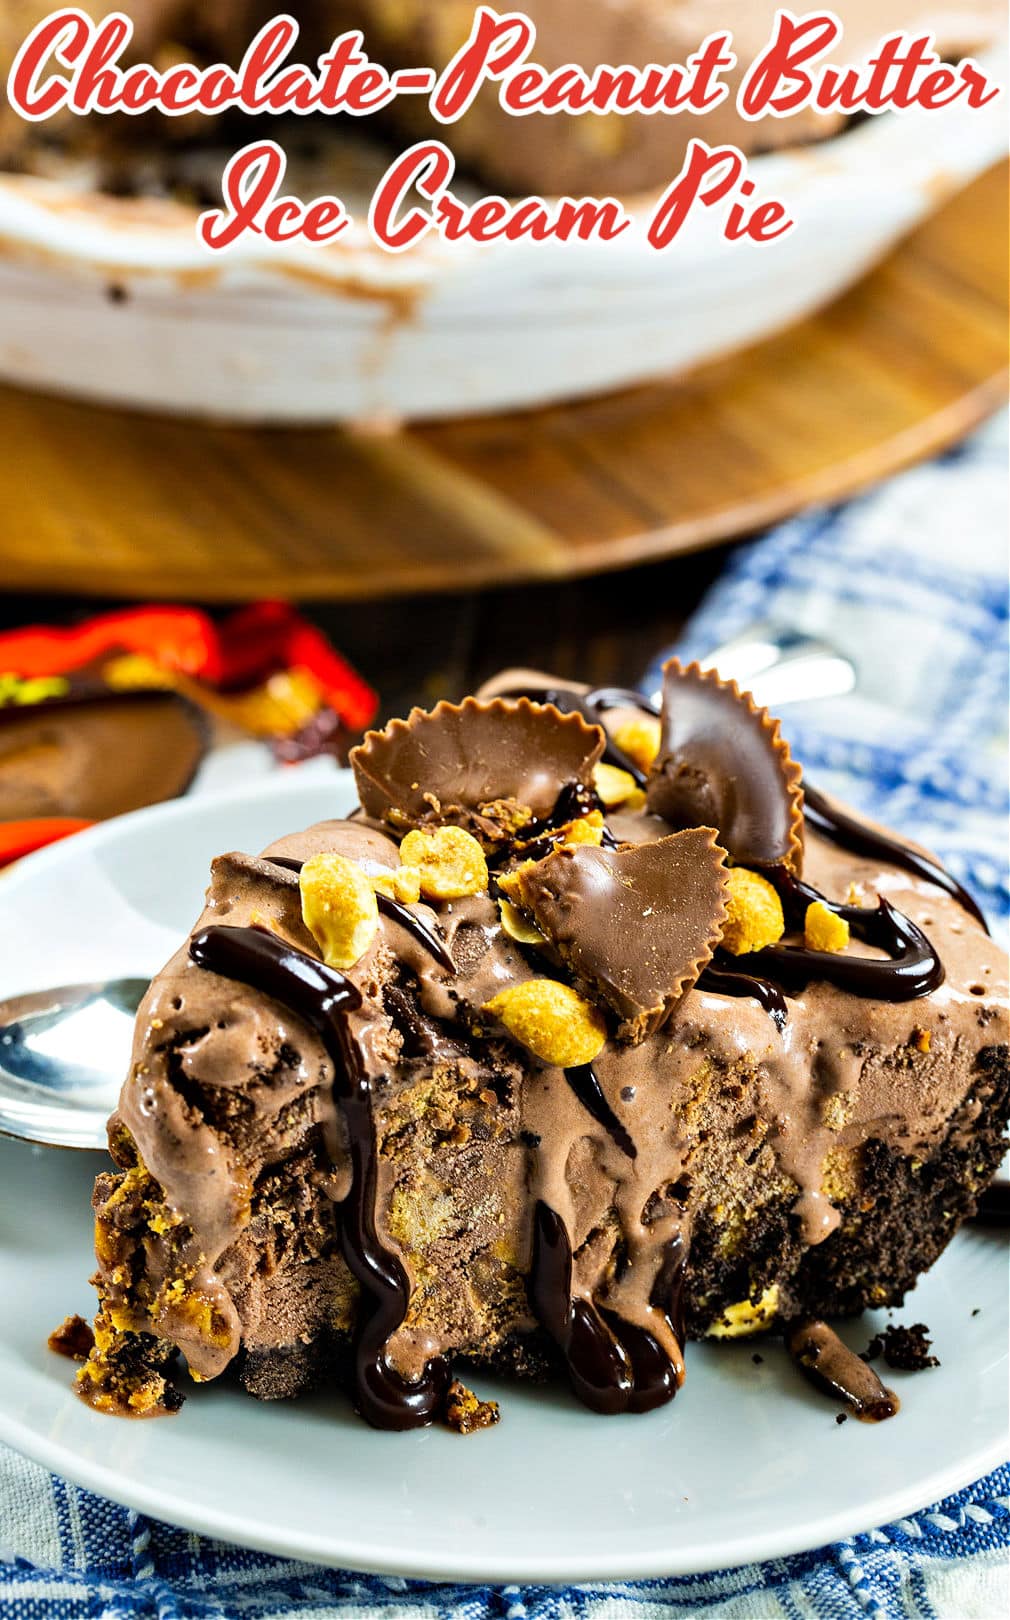 Slice of Chocolate-Peanut Butter Ice Cream Pie drizzled with fudge sauce.